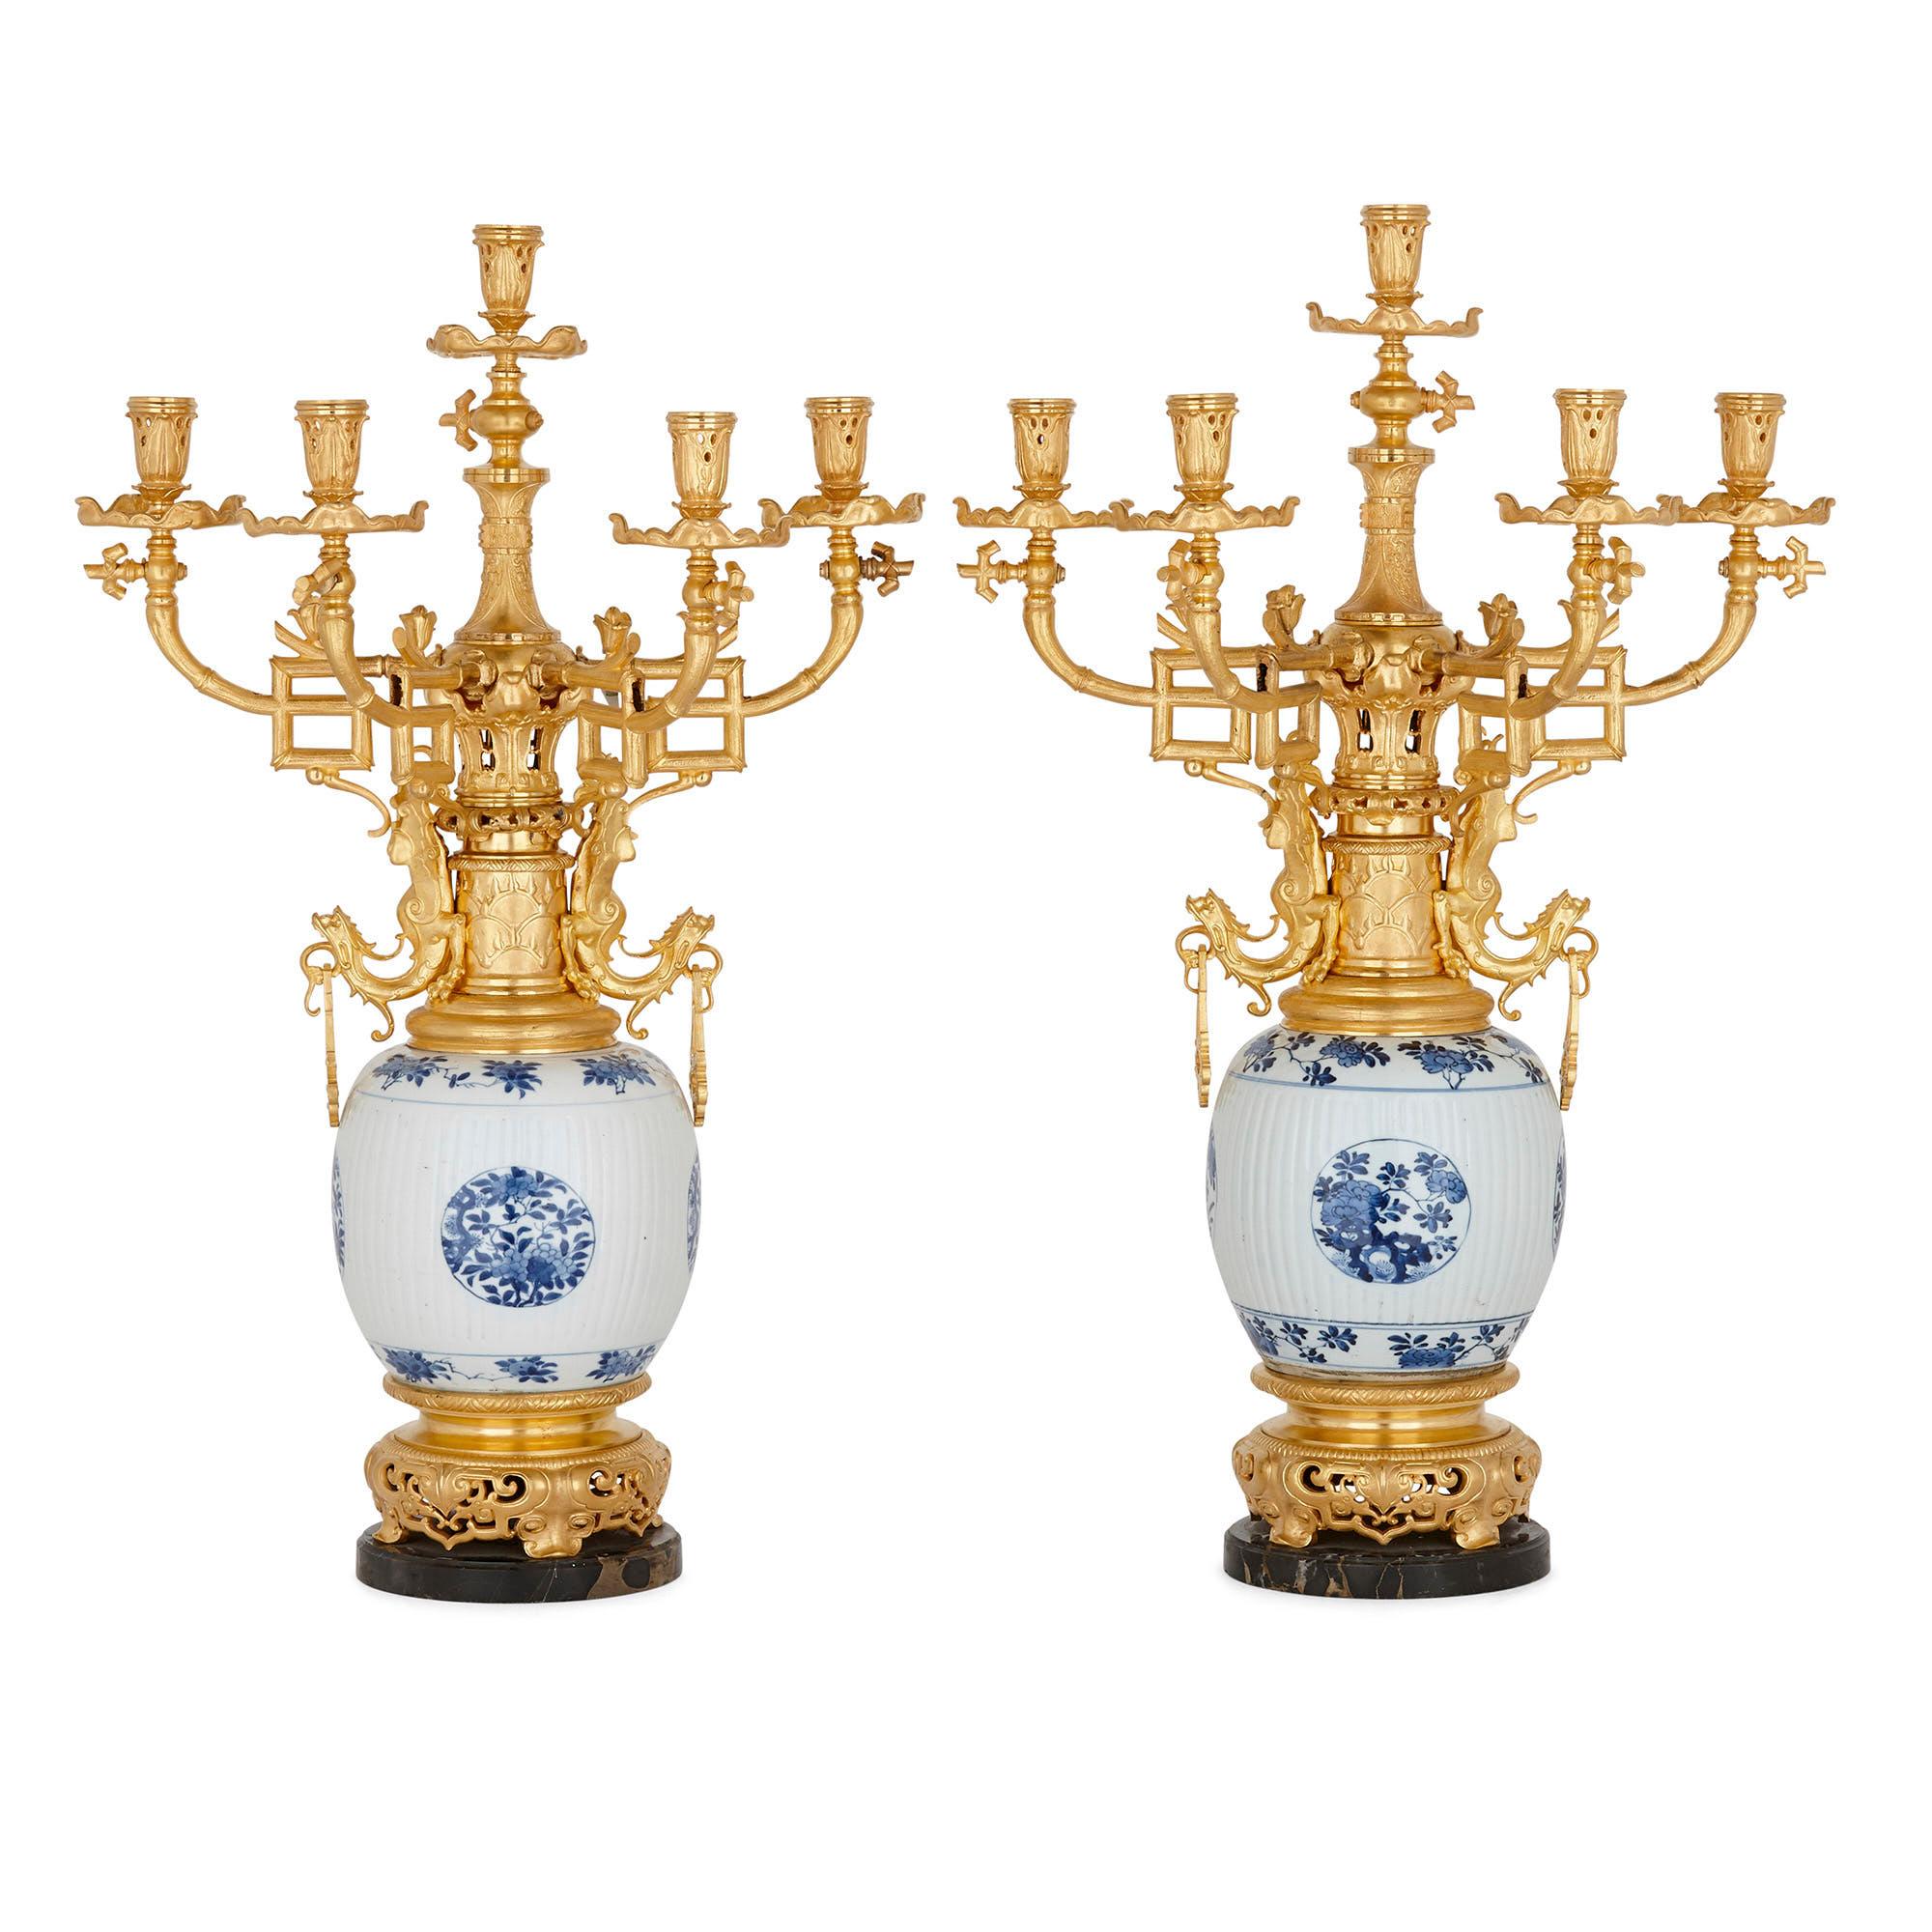 Pair of Chinese porcelain and French Chinoiserie style gilt bronze candelabra
Chinese and French, 19th Century
Height 72cm, width 47cm, depth 35cm

This superb pair of candelabra brings together the best of Chinese and French decorative art.